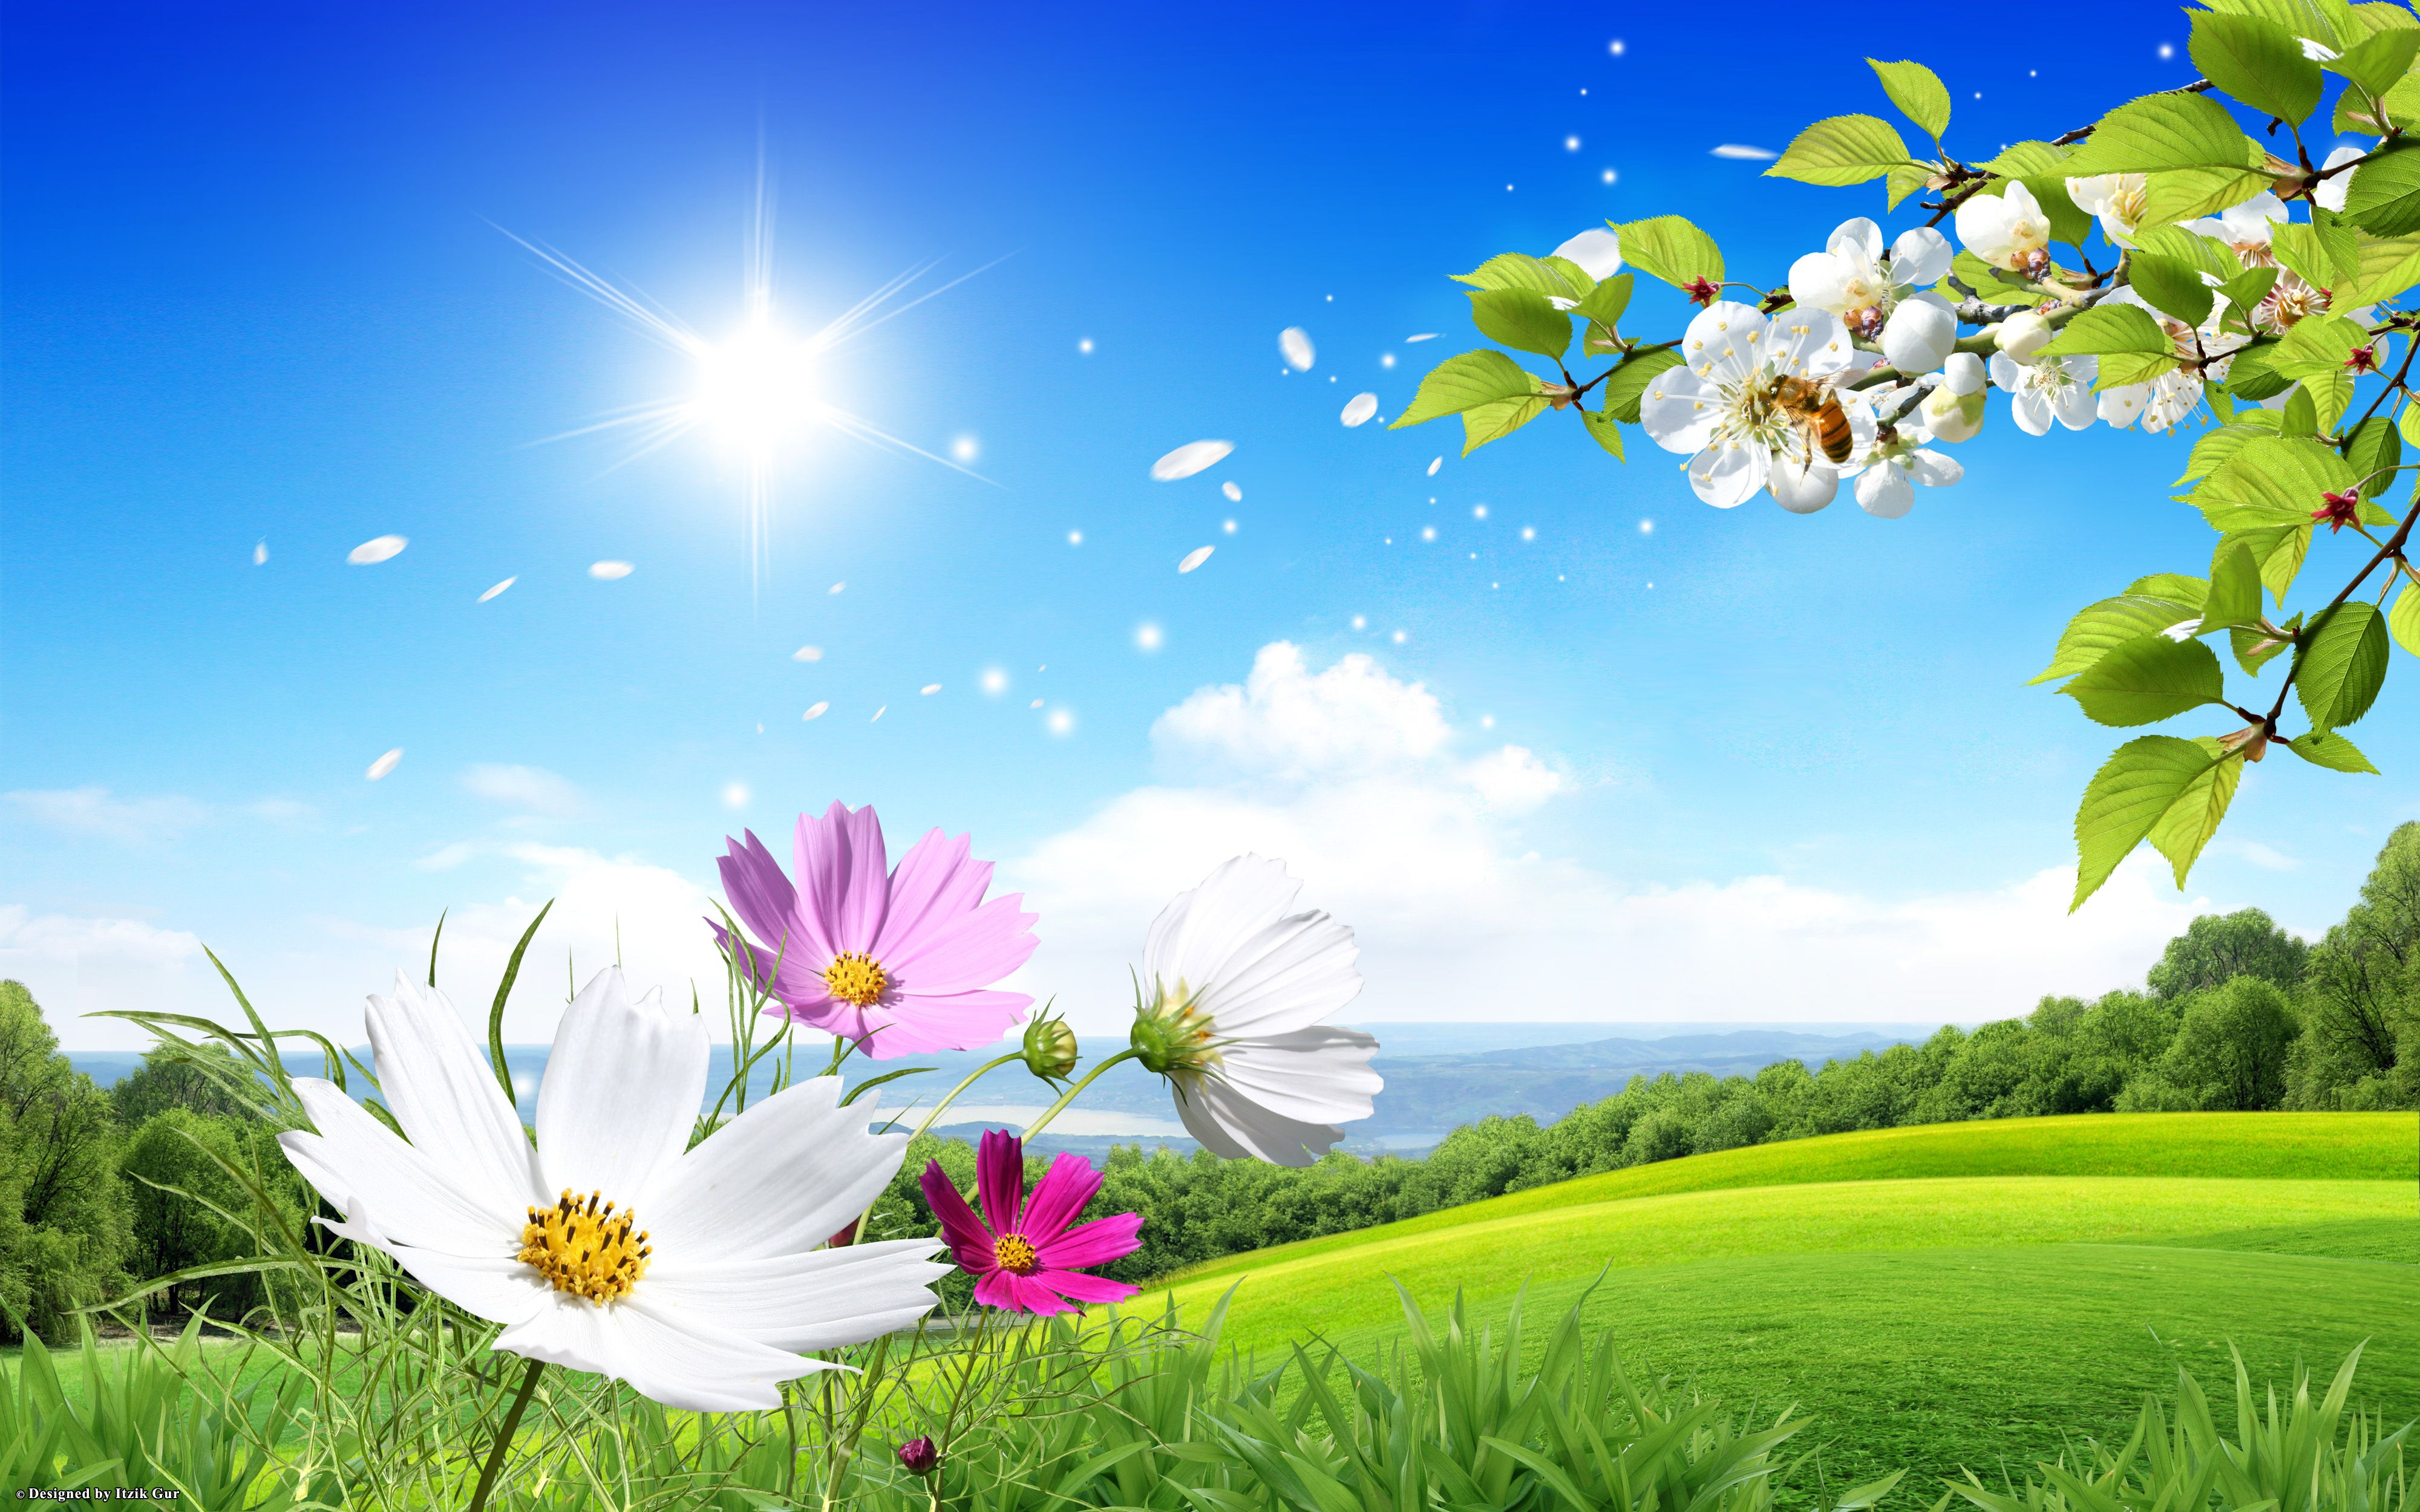 nature wallpaper full hd,natural landscape,people in nature,nature,sky,flower